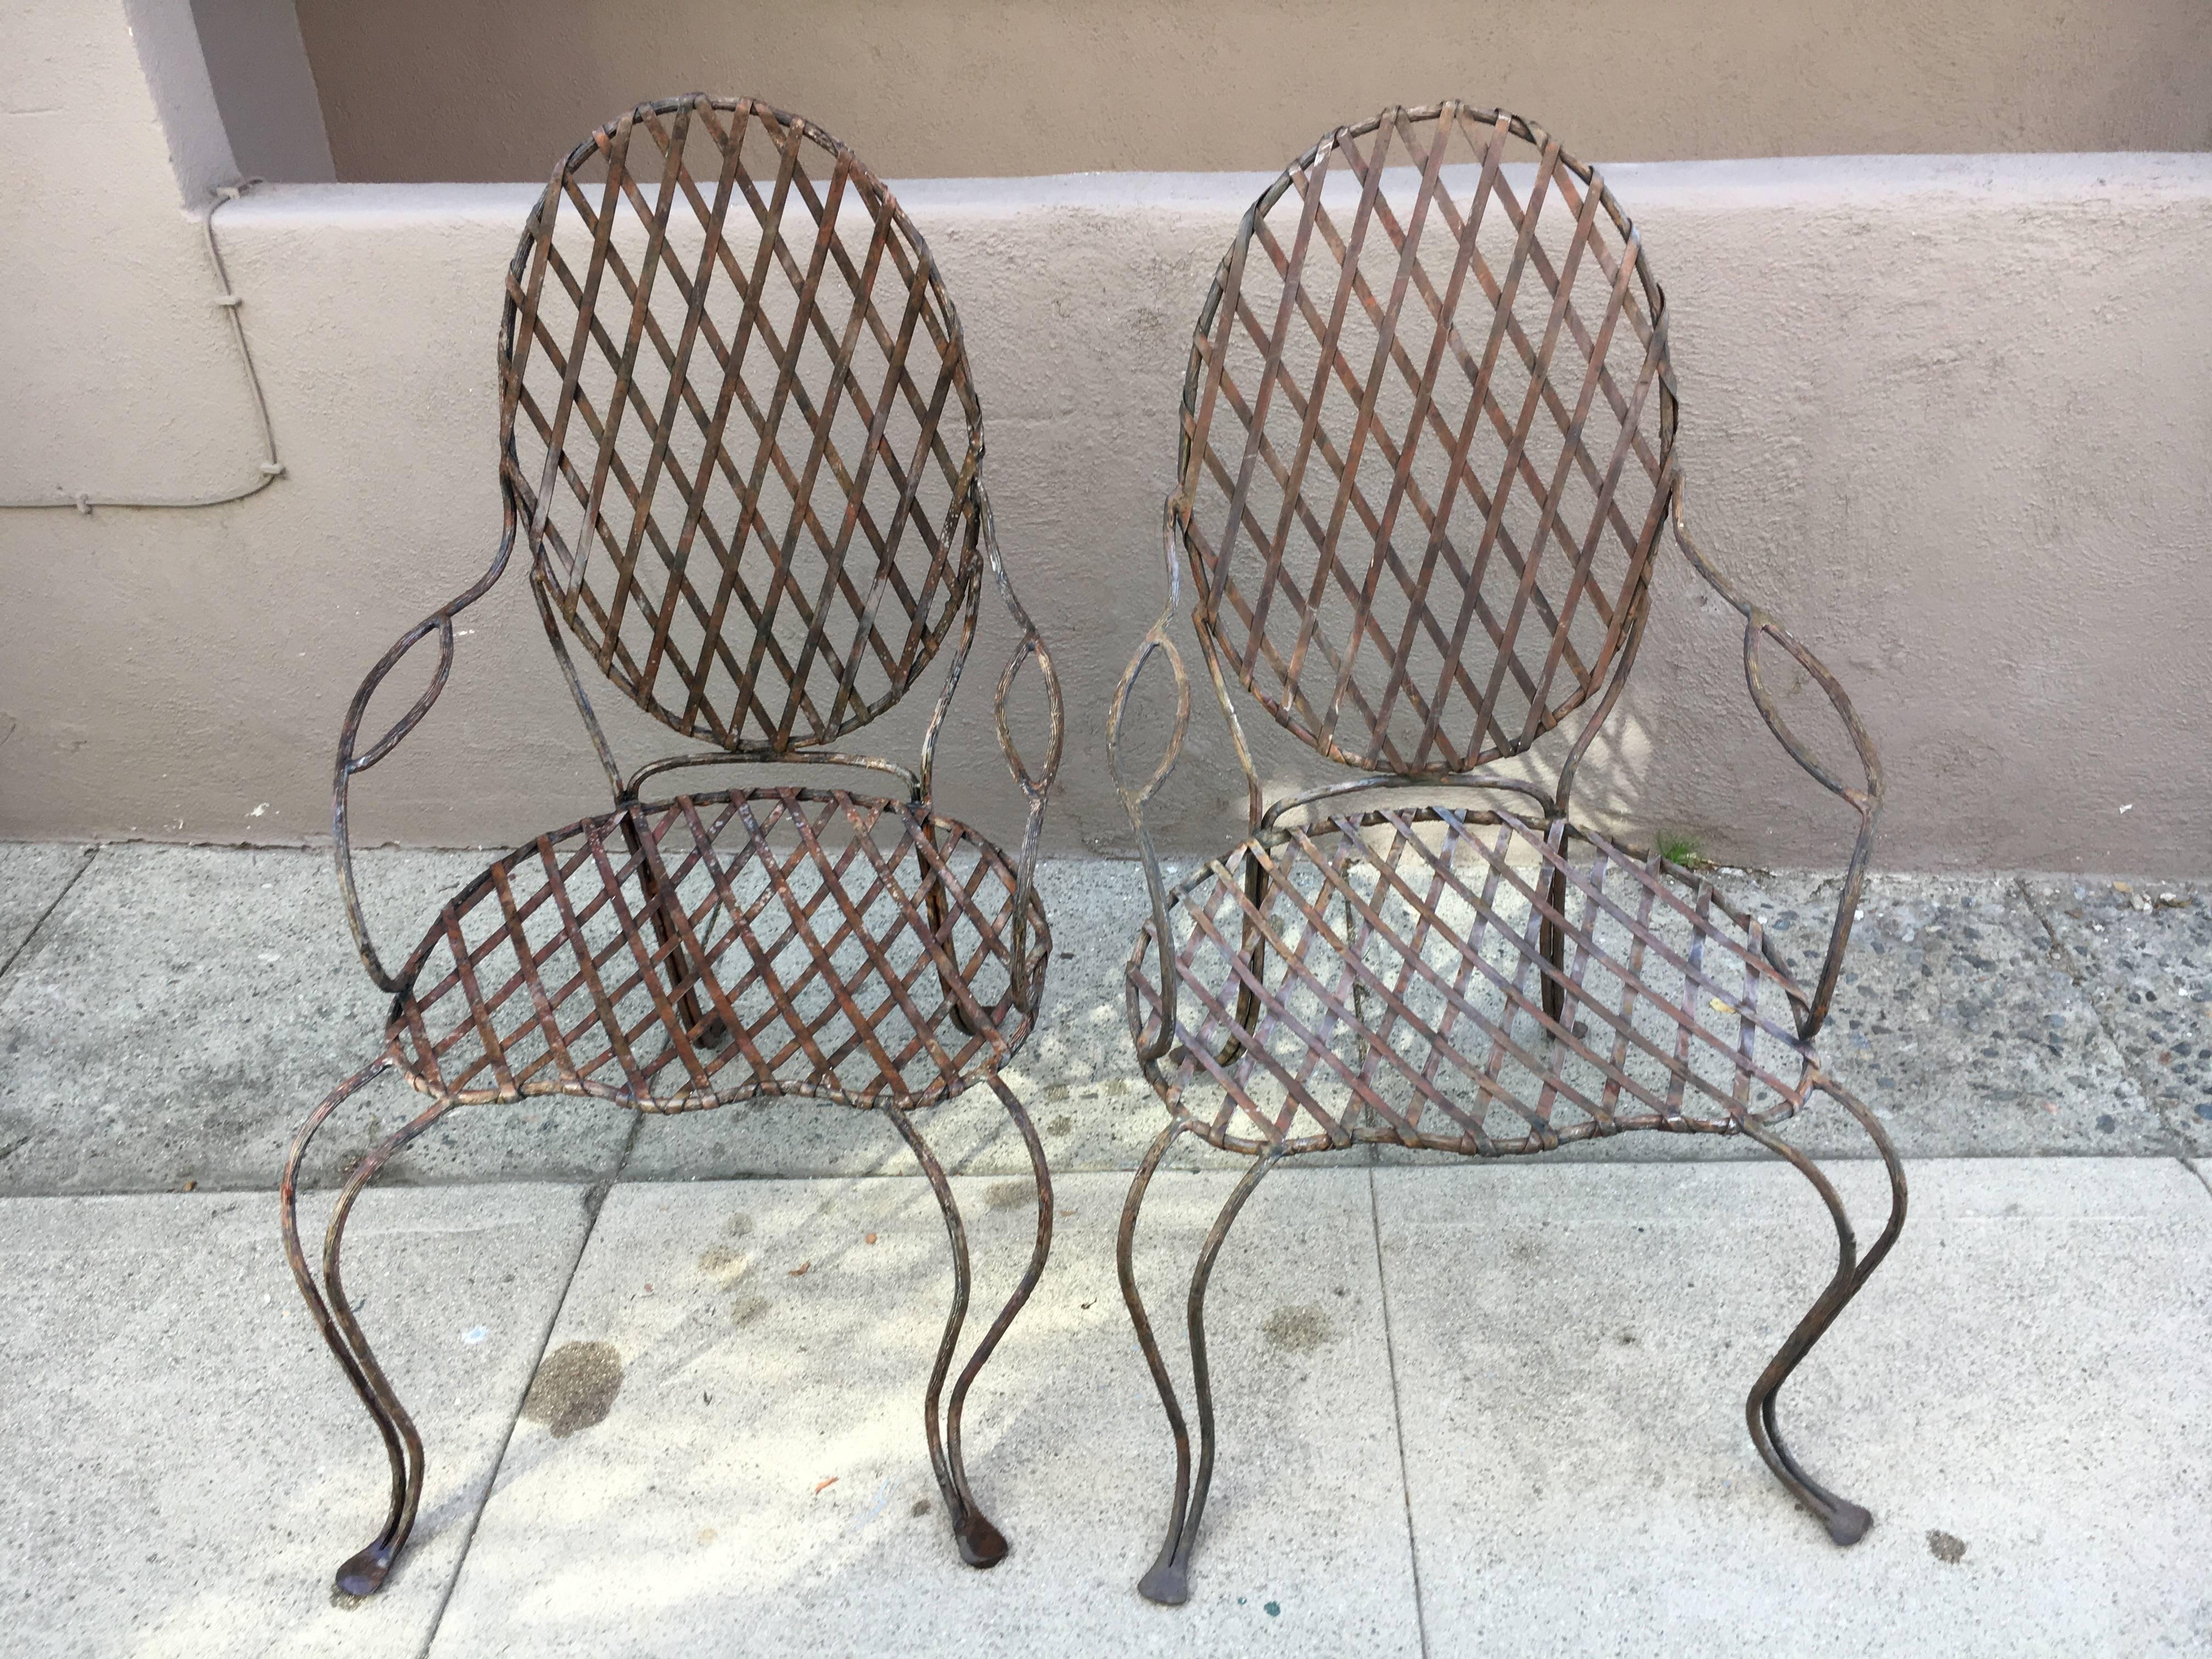 Pair of Twig iron outdoor chairs by Rose Tarlow Melrose House - Rose Tarlow is known as one of the most influential designers in the world, doing homes and custom furniture for the likes of Oprah Winfrey.
The pair of lattice faux bois twig chairs